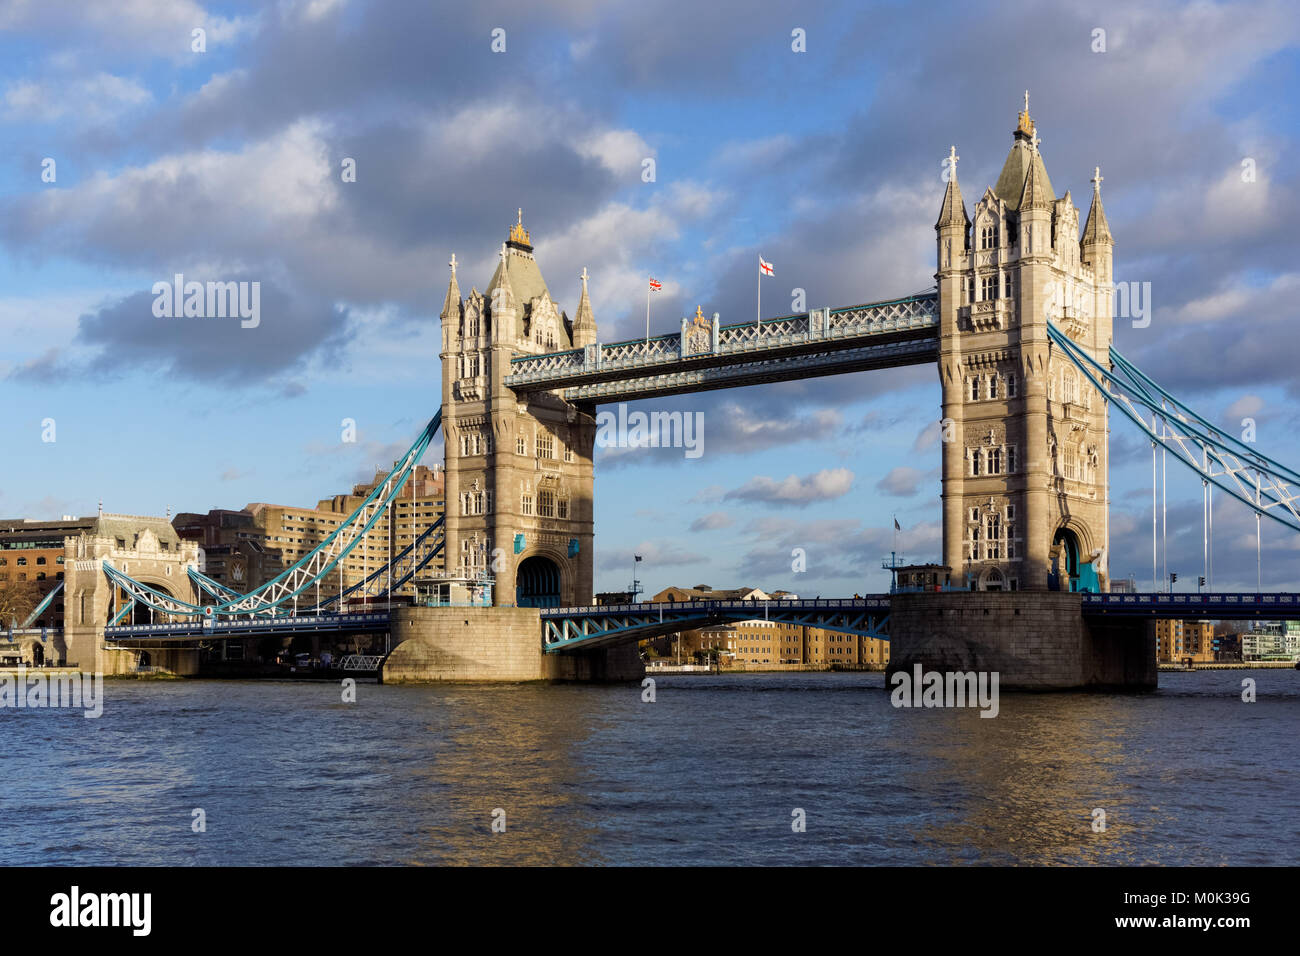 The Tower Bridge on the River Thames in London, England United Kingdom UK Stock Photo